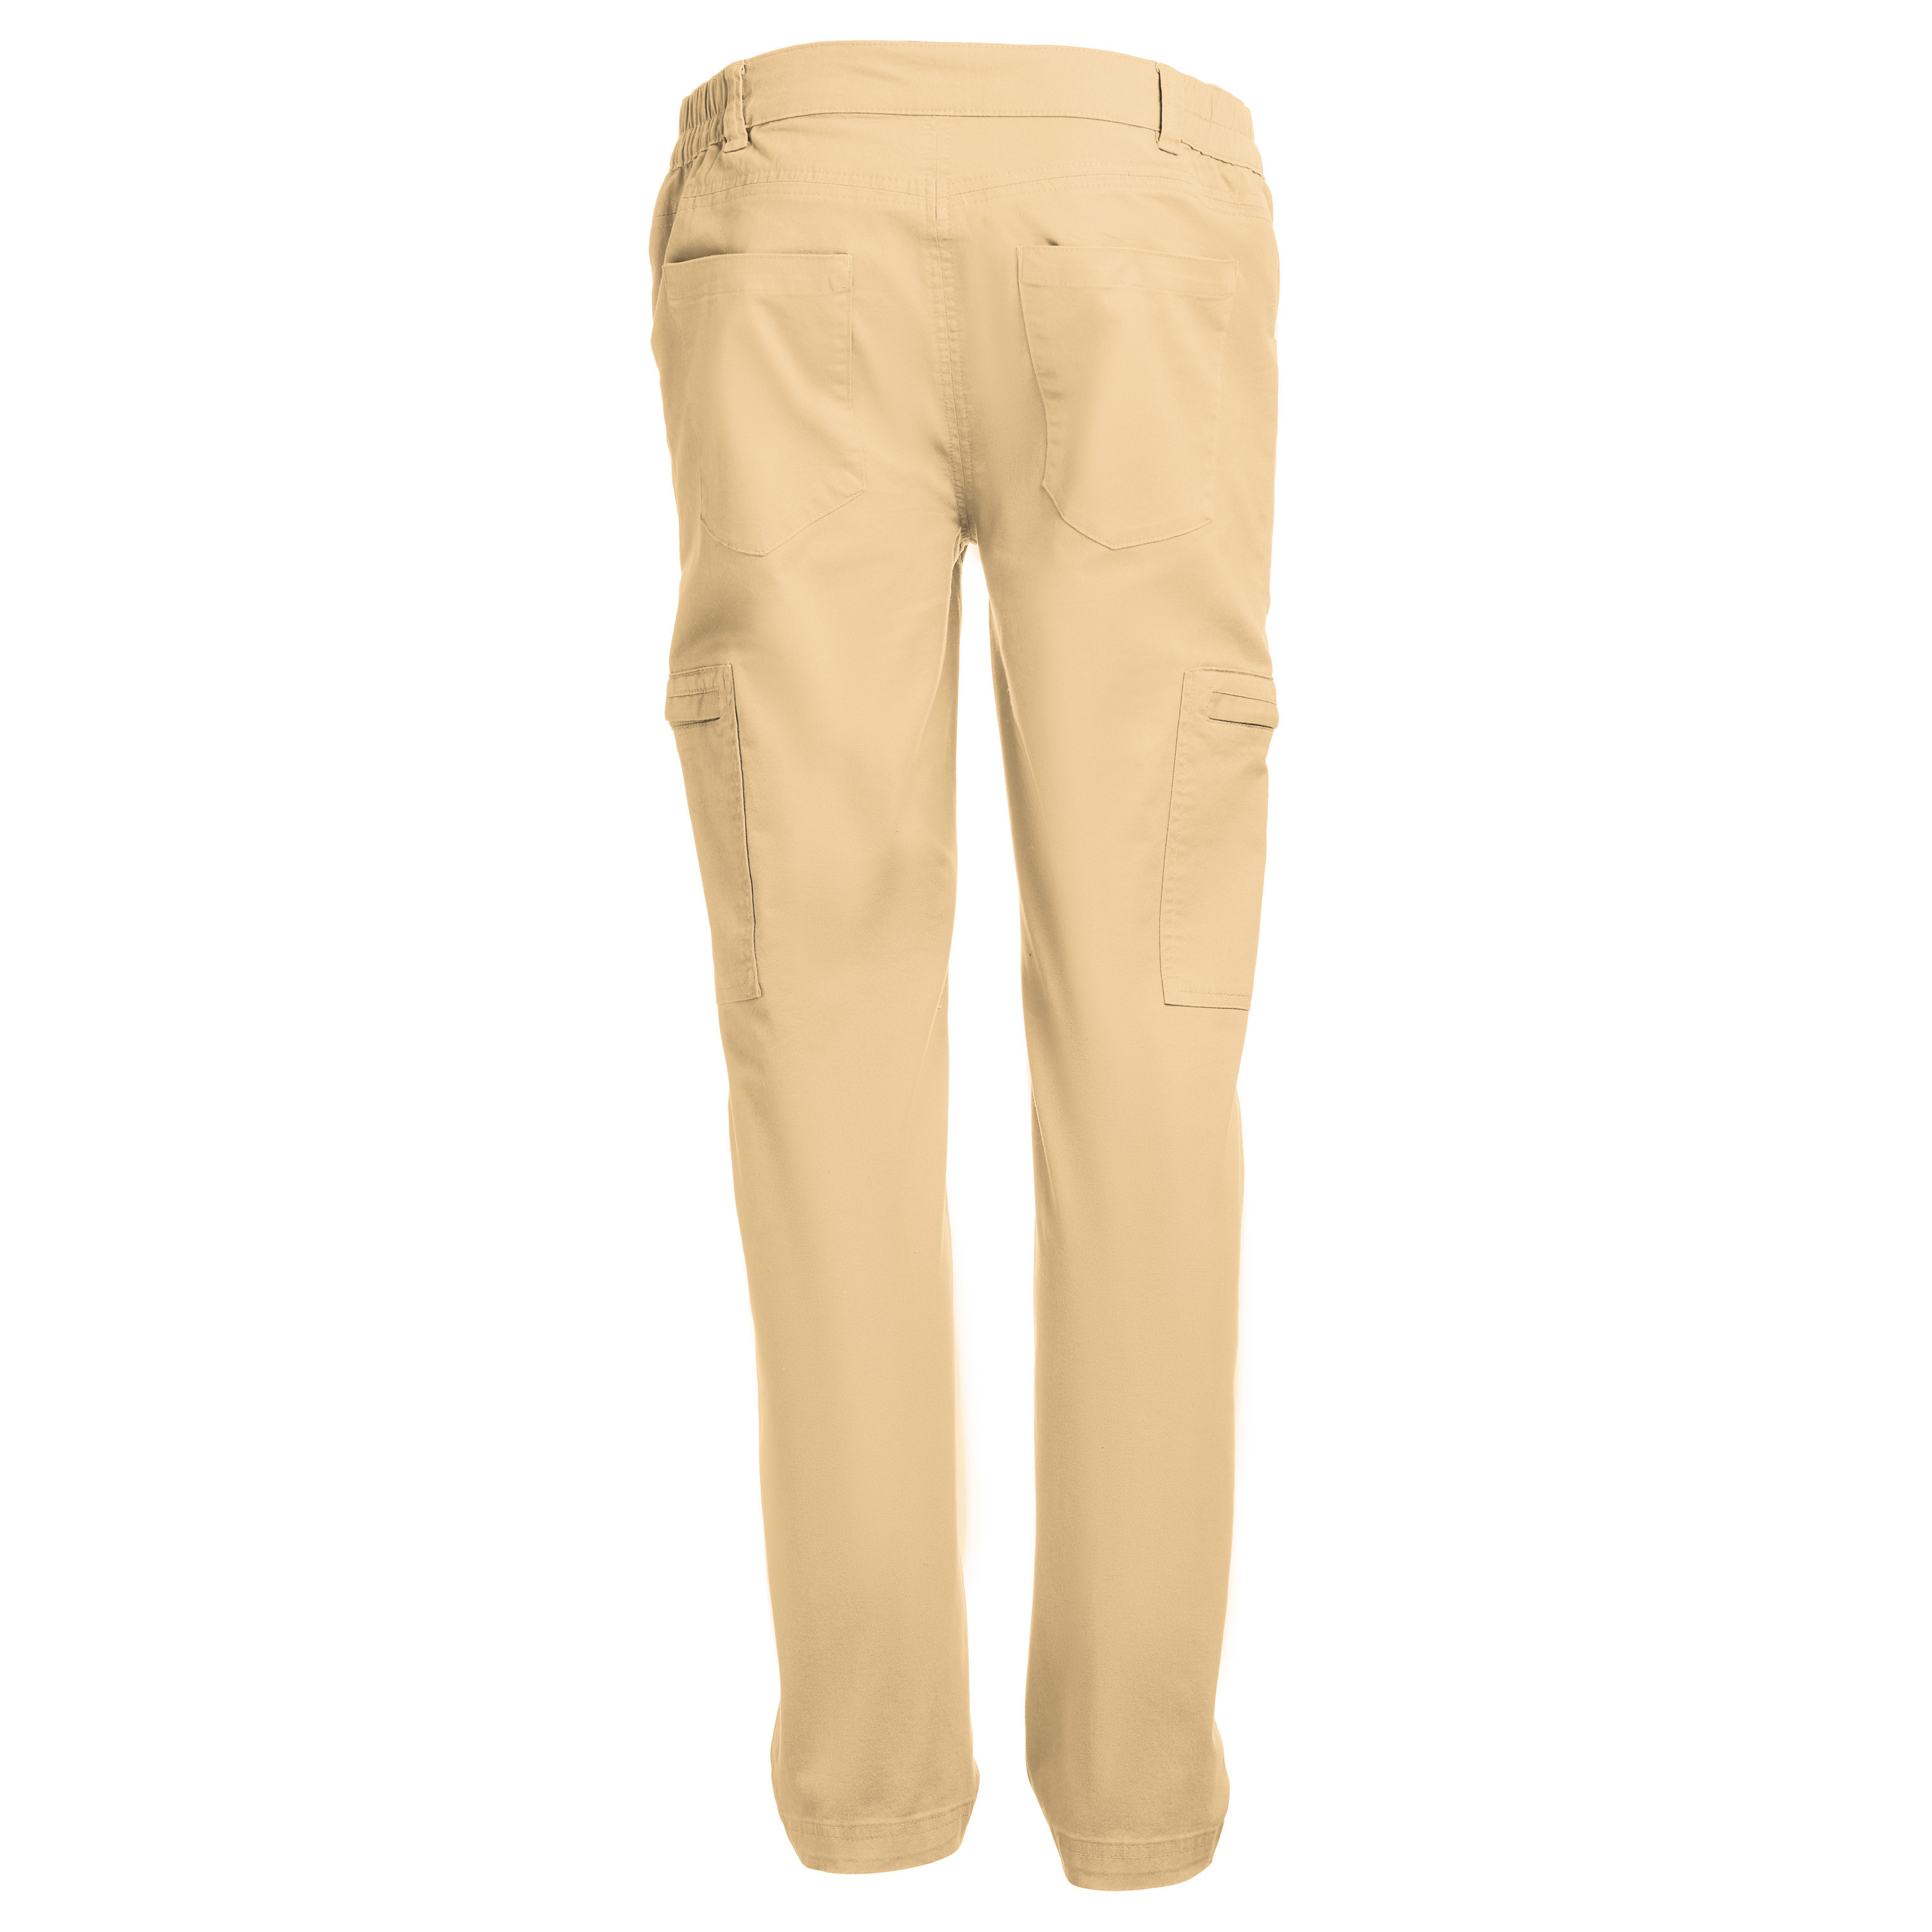 THC Tallin - Workwear trousers with side pockets 240g